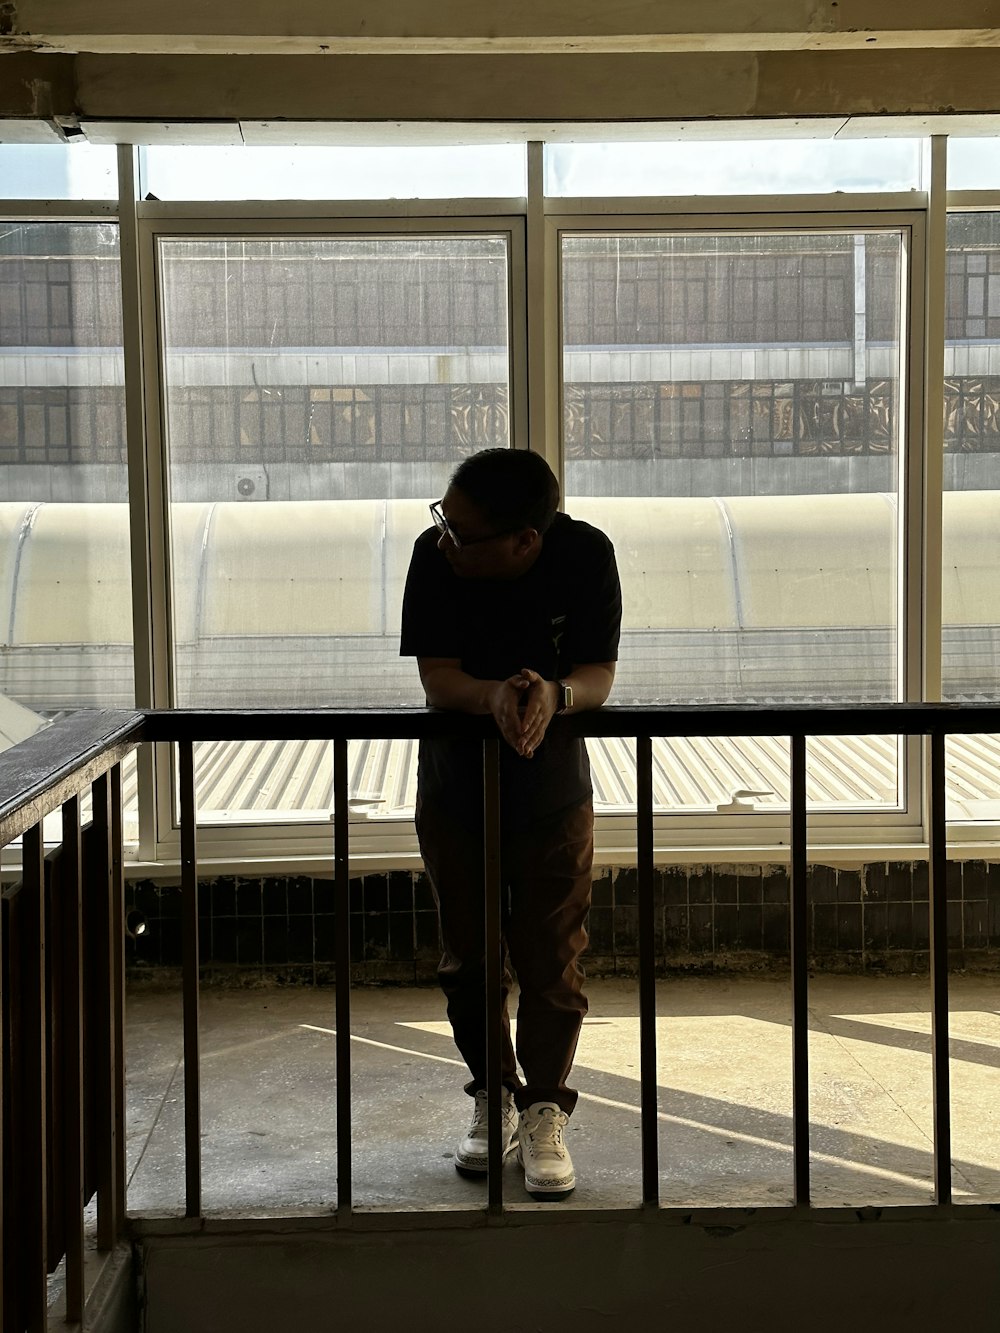 a person leaning against a railing in front of a window